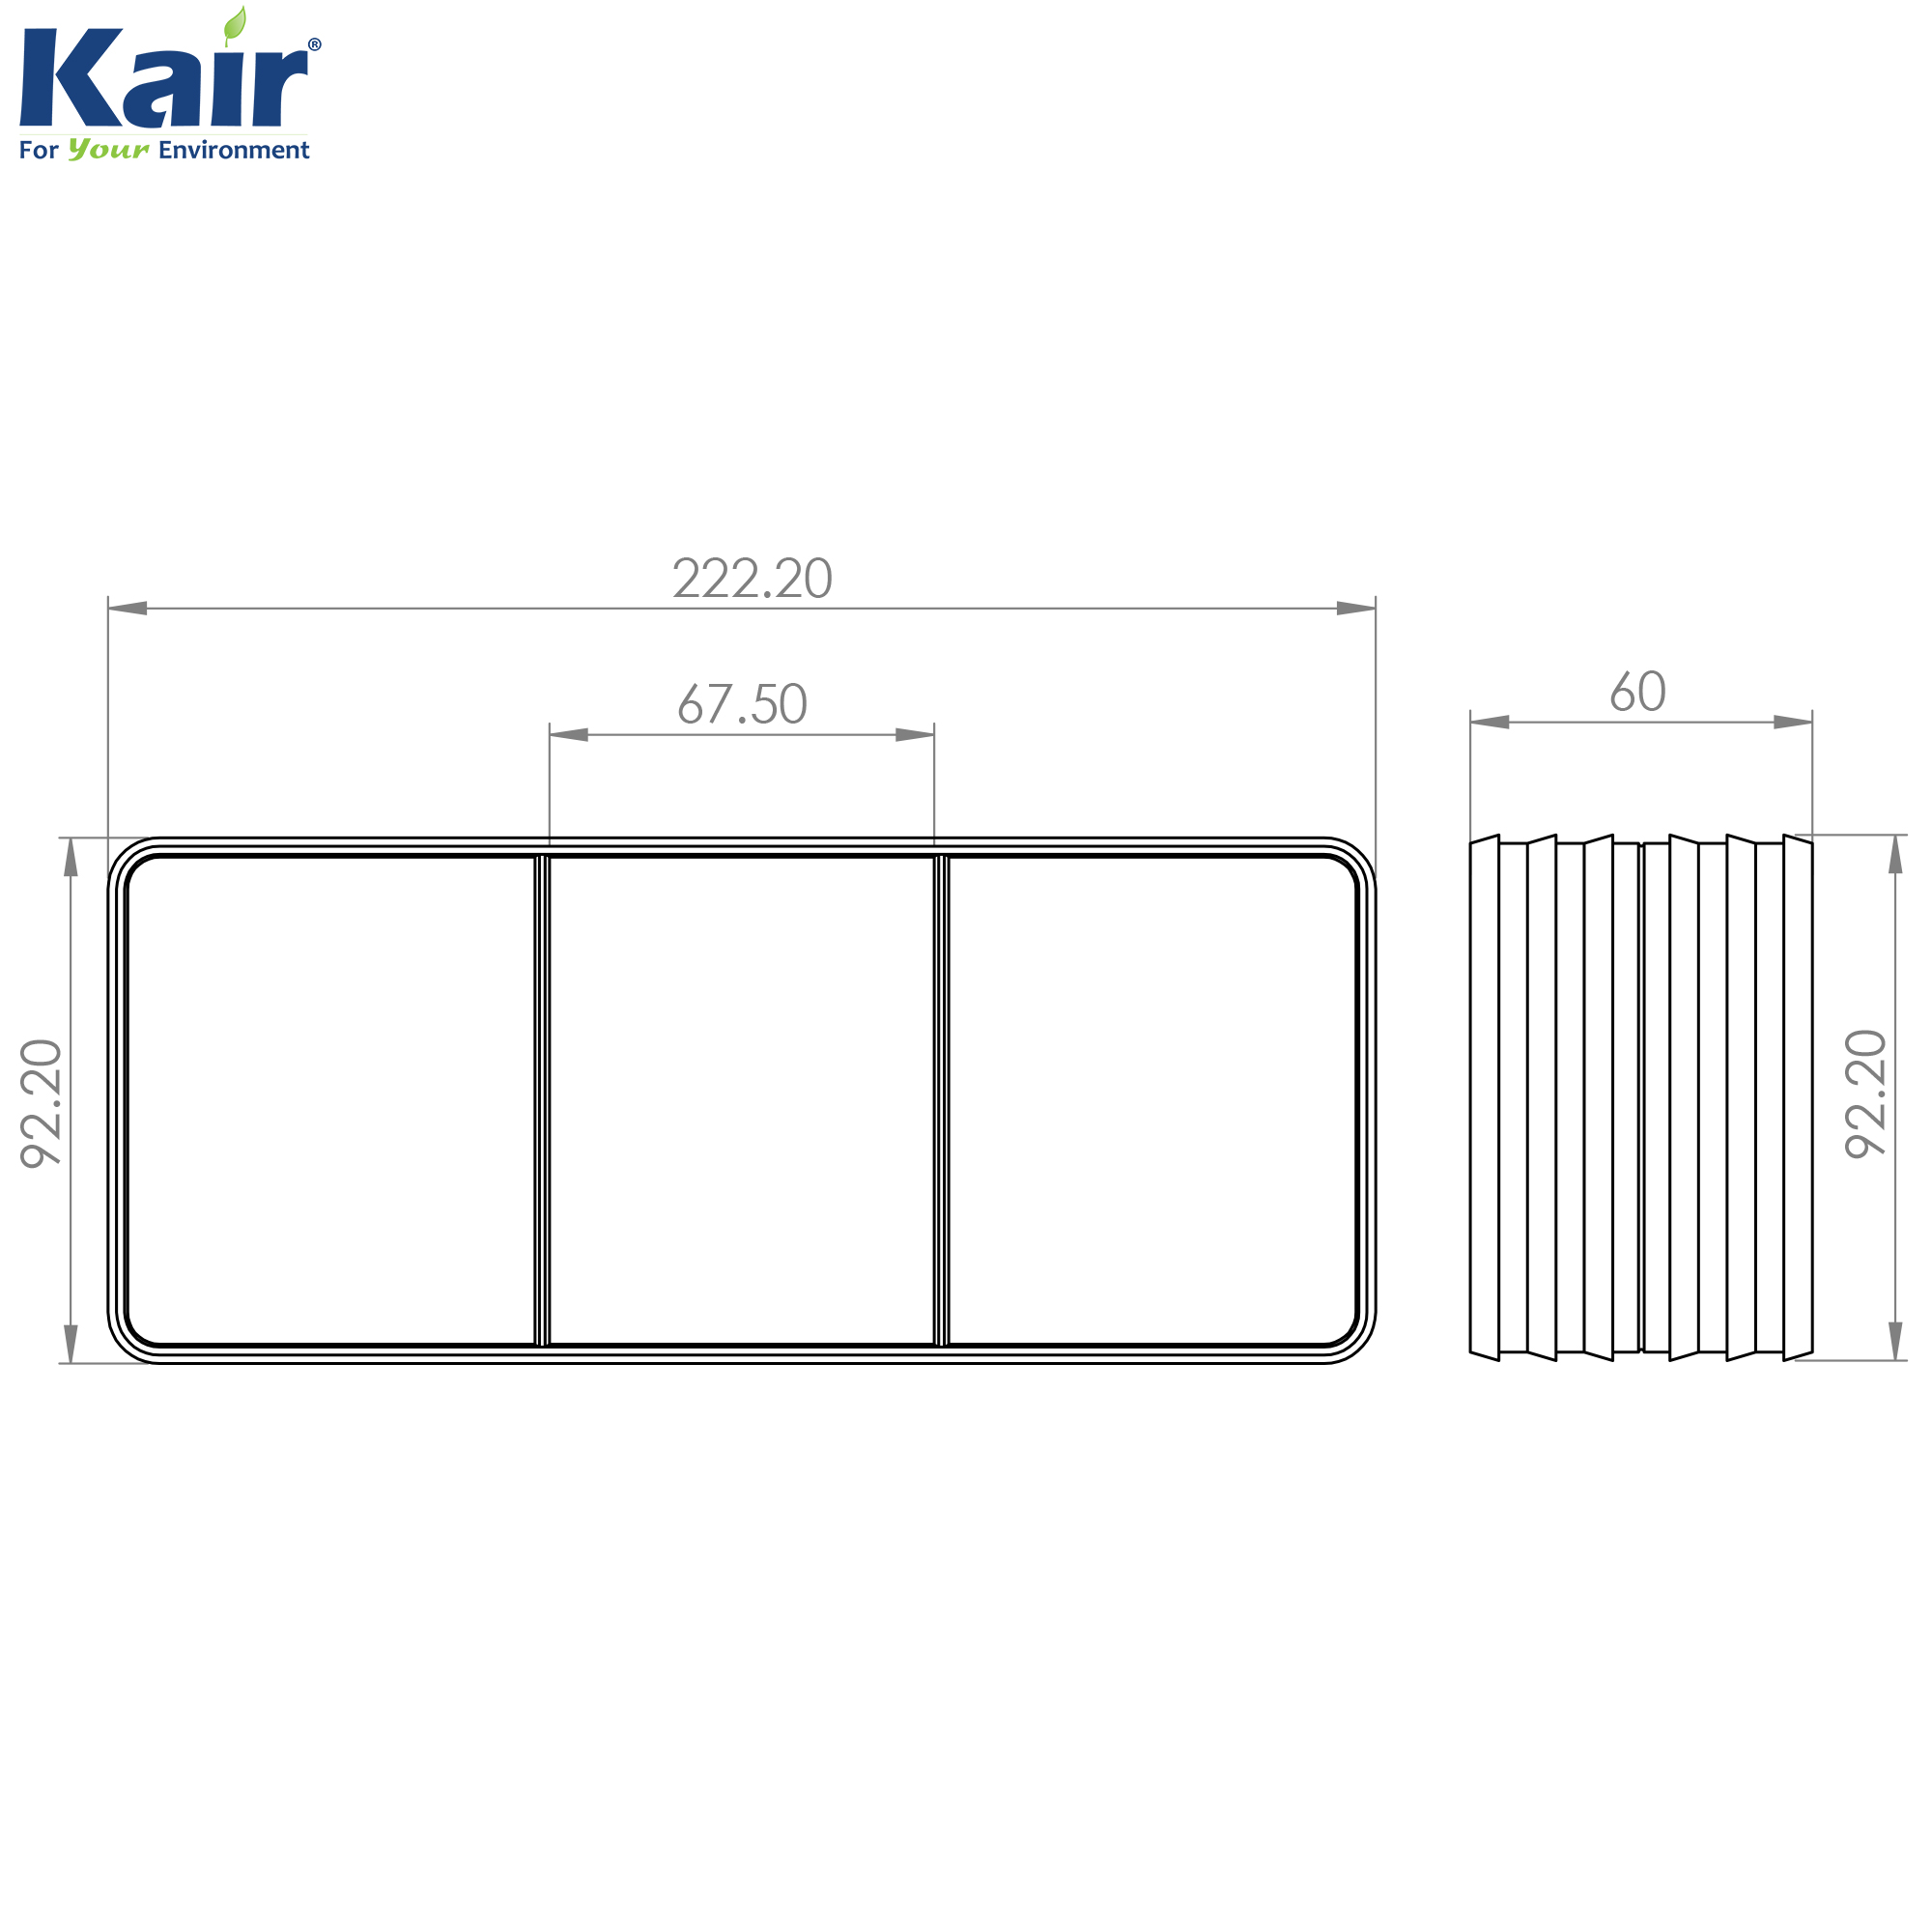 Thermal Male Duct To Duct Connector 220X90mm Self-Seal by Kair